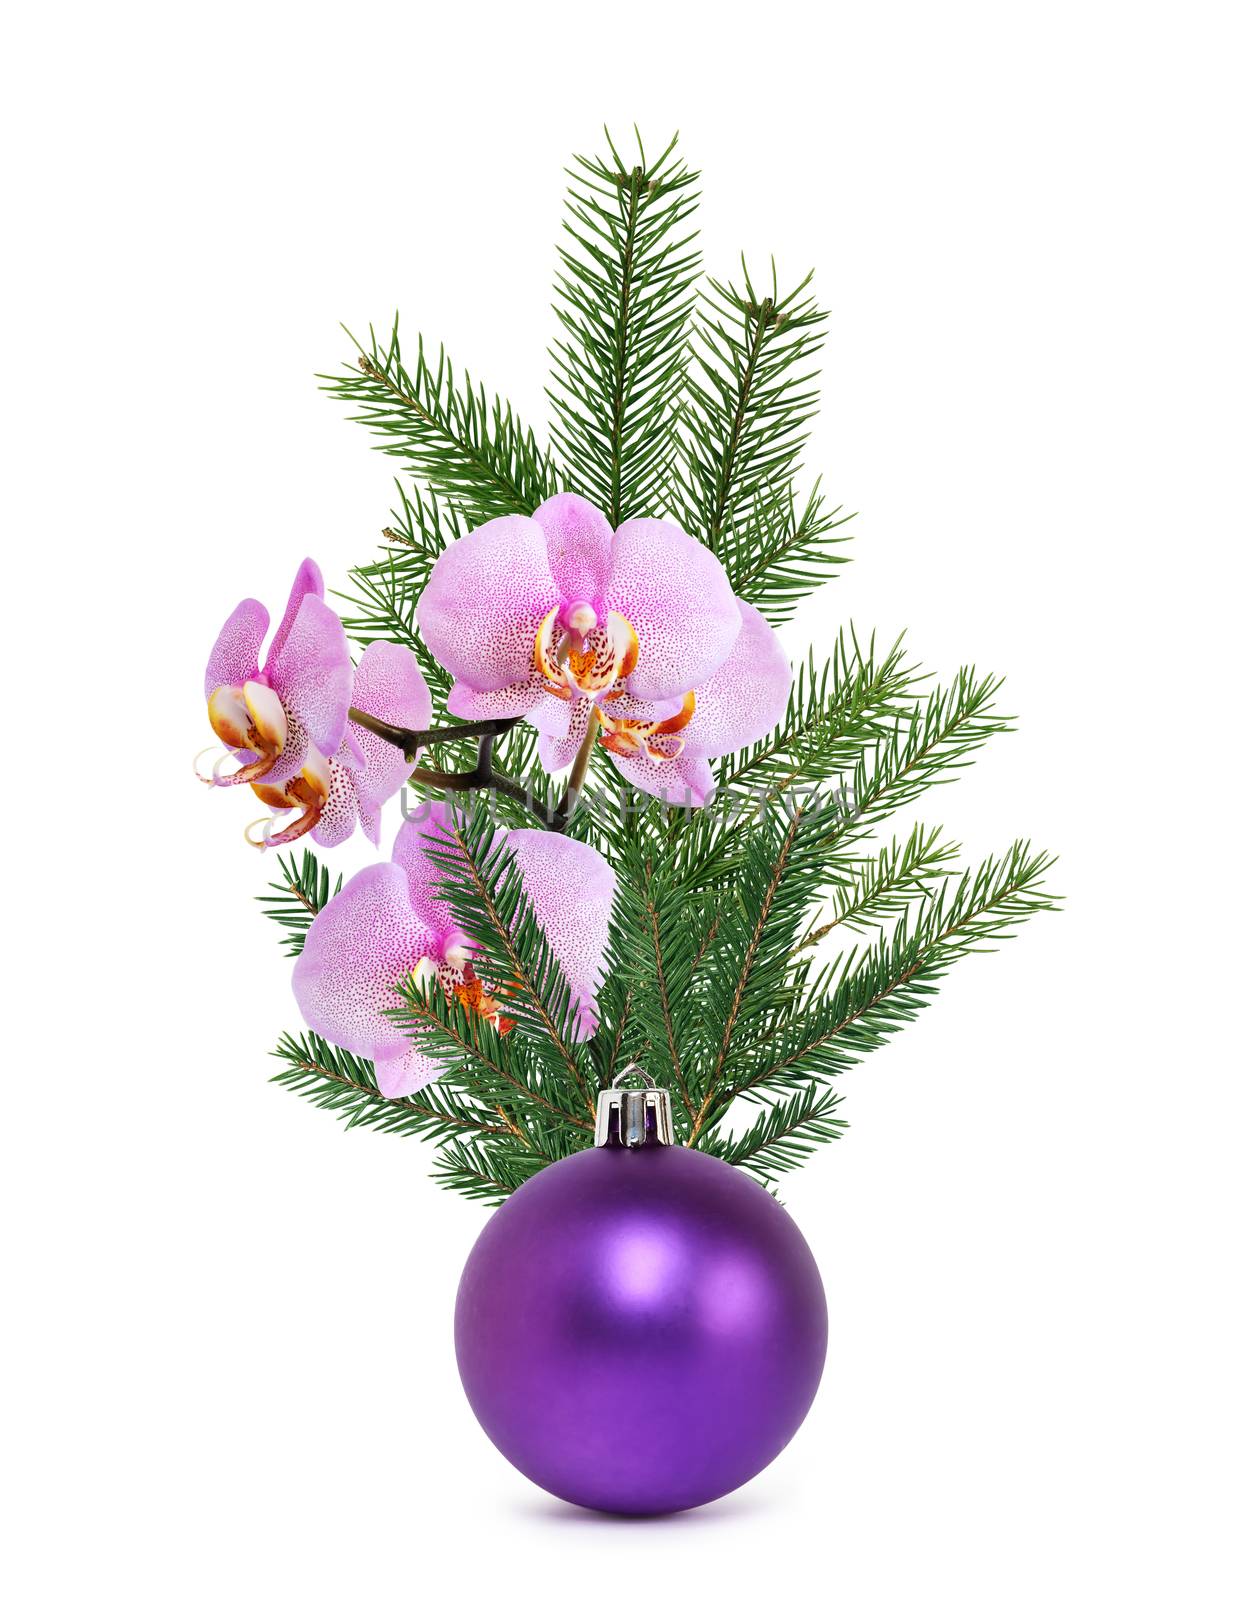 Christmas Decoration With Orchid by kvkirillov